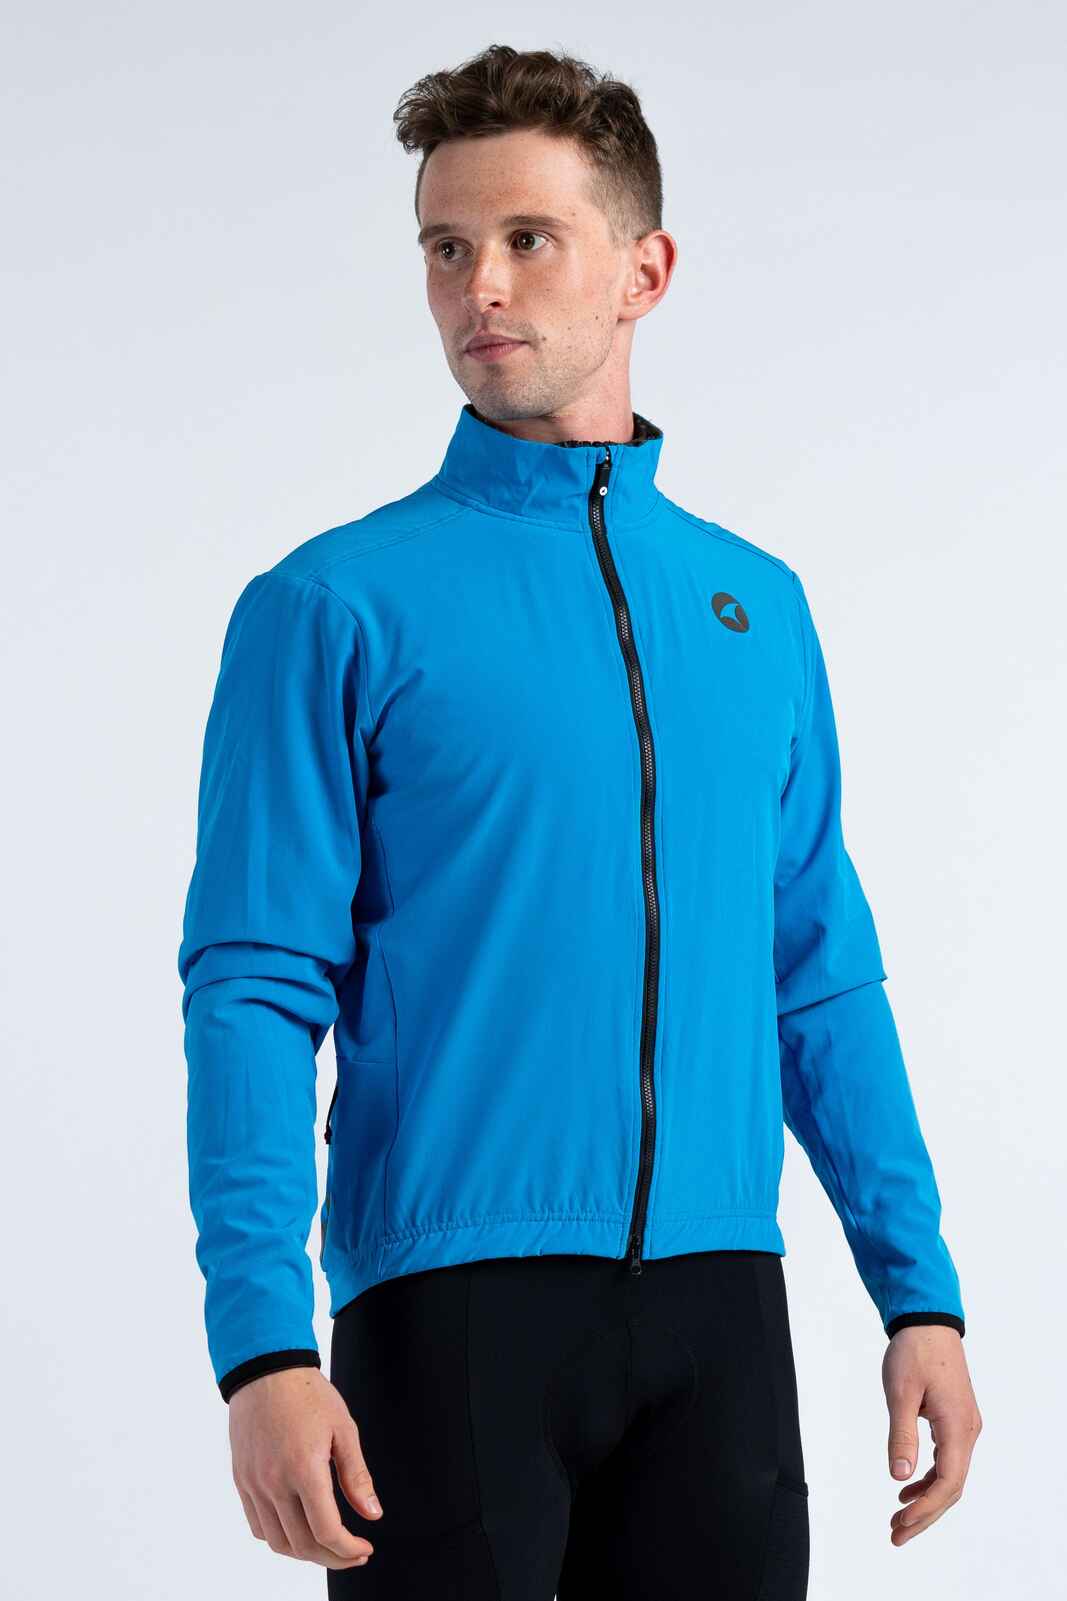 Men's Bright Blue Thermal Cycling Jacket 